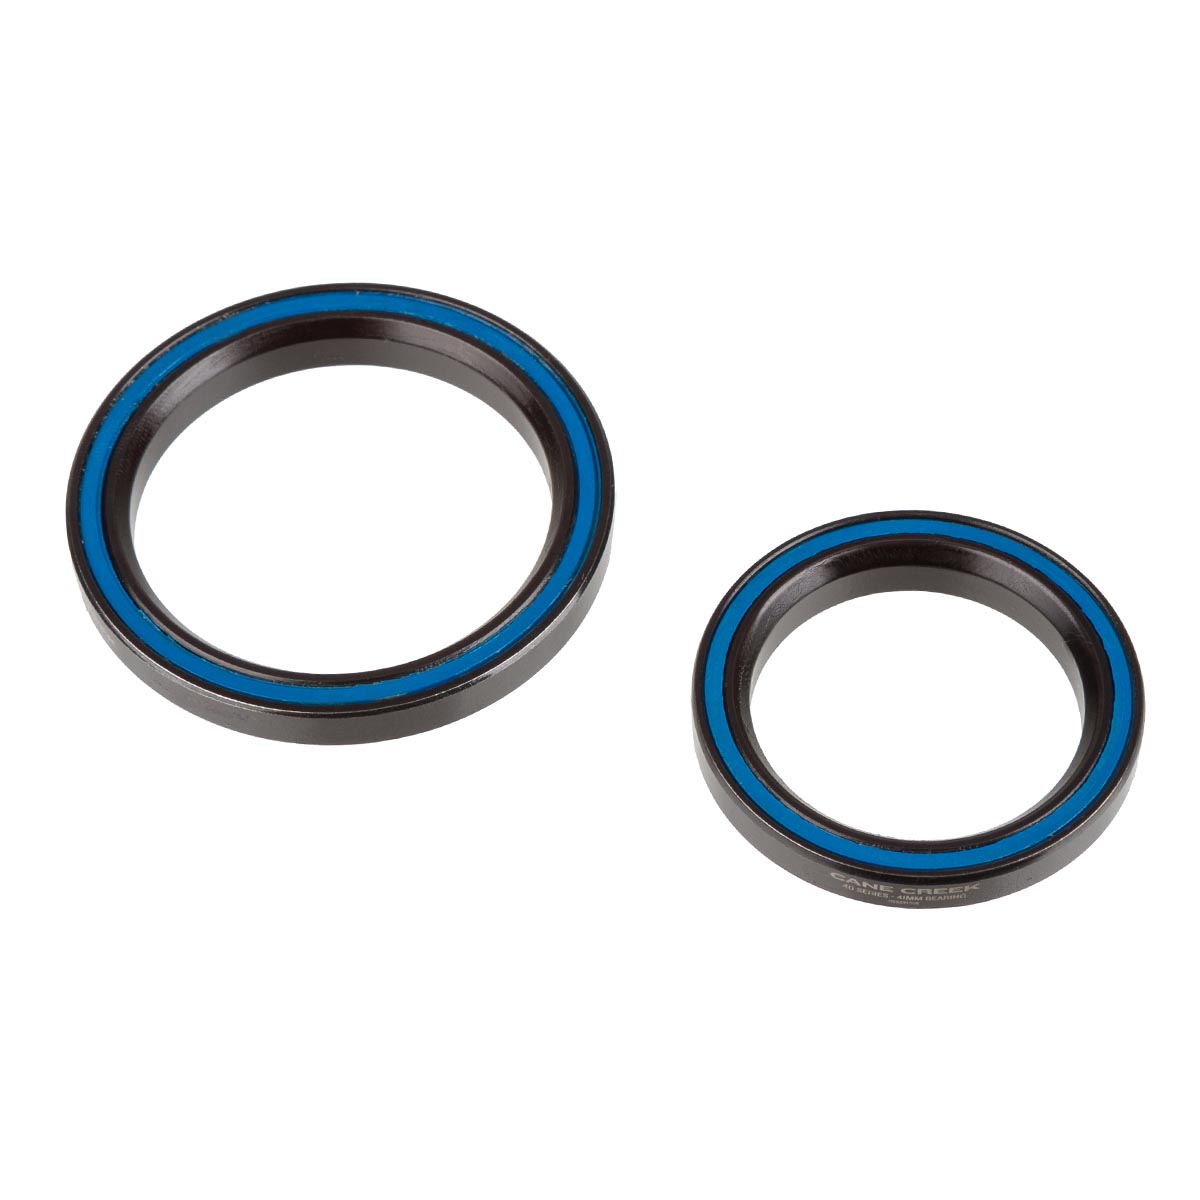 Cane Creek Headset bearings kit 40 Tapered, 41 mm and 52 mm